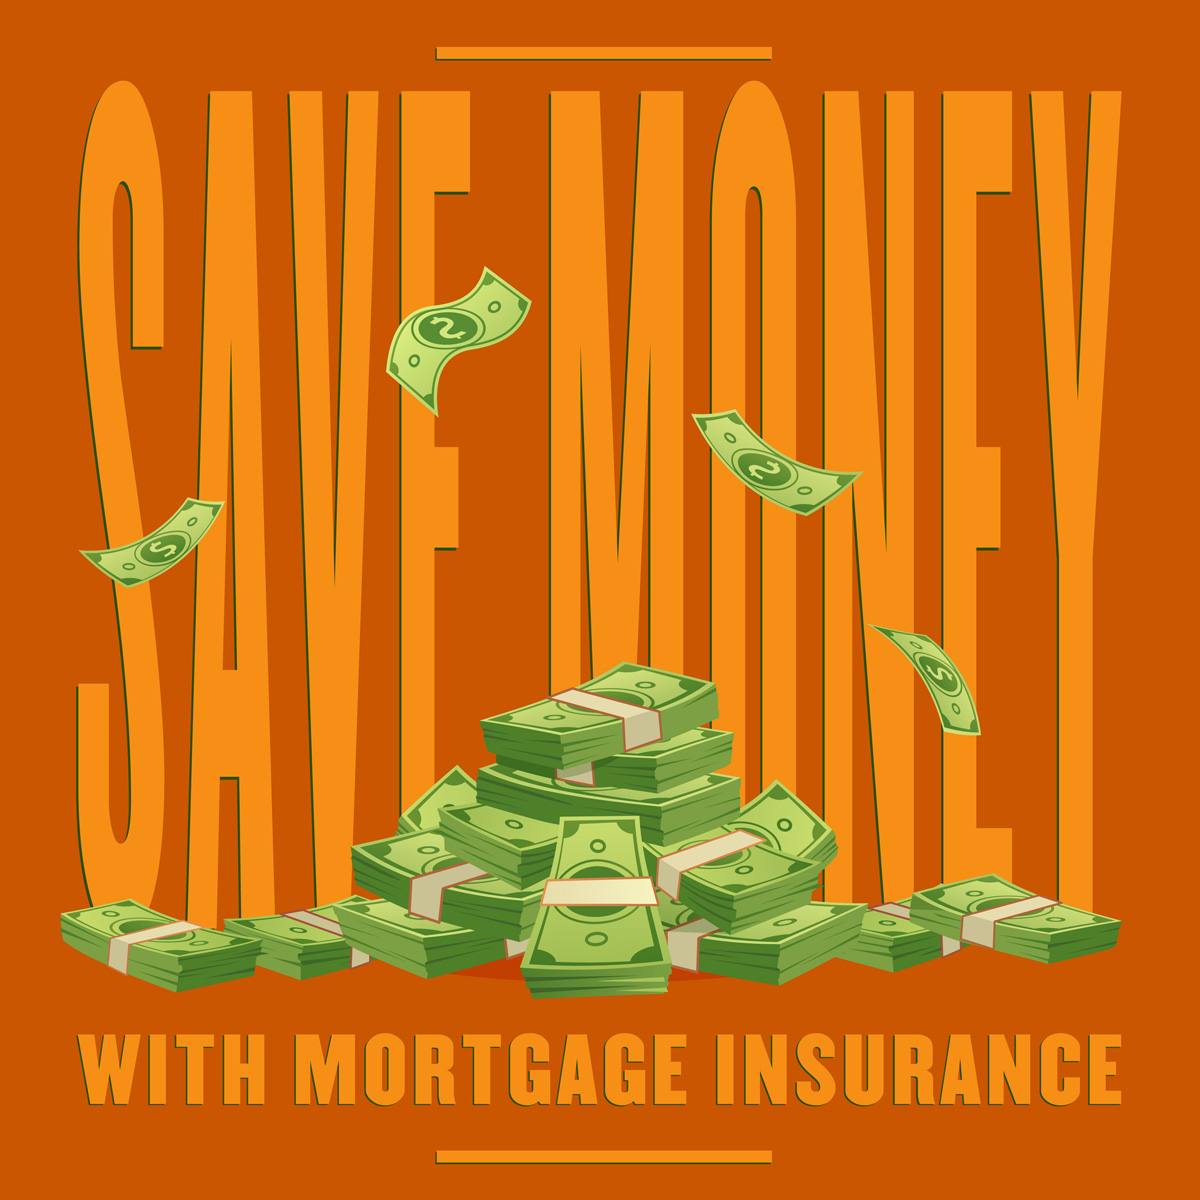 You don’t need a large down payment to settle down. Enjoy a low monthly payment with private mortgage insurance discounts. Reach out to learn more - 518-782-1202.  Think Mortgage... Think Maple Tree!  #lowdownpayment #FHAMortgage #USDAMortgage #VAMortgage #firsttimehomebuyer